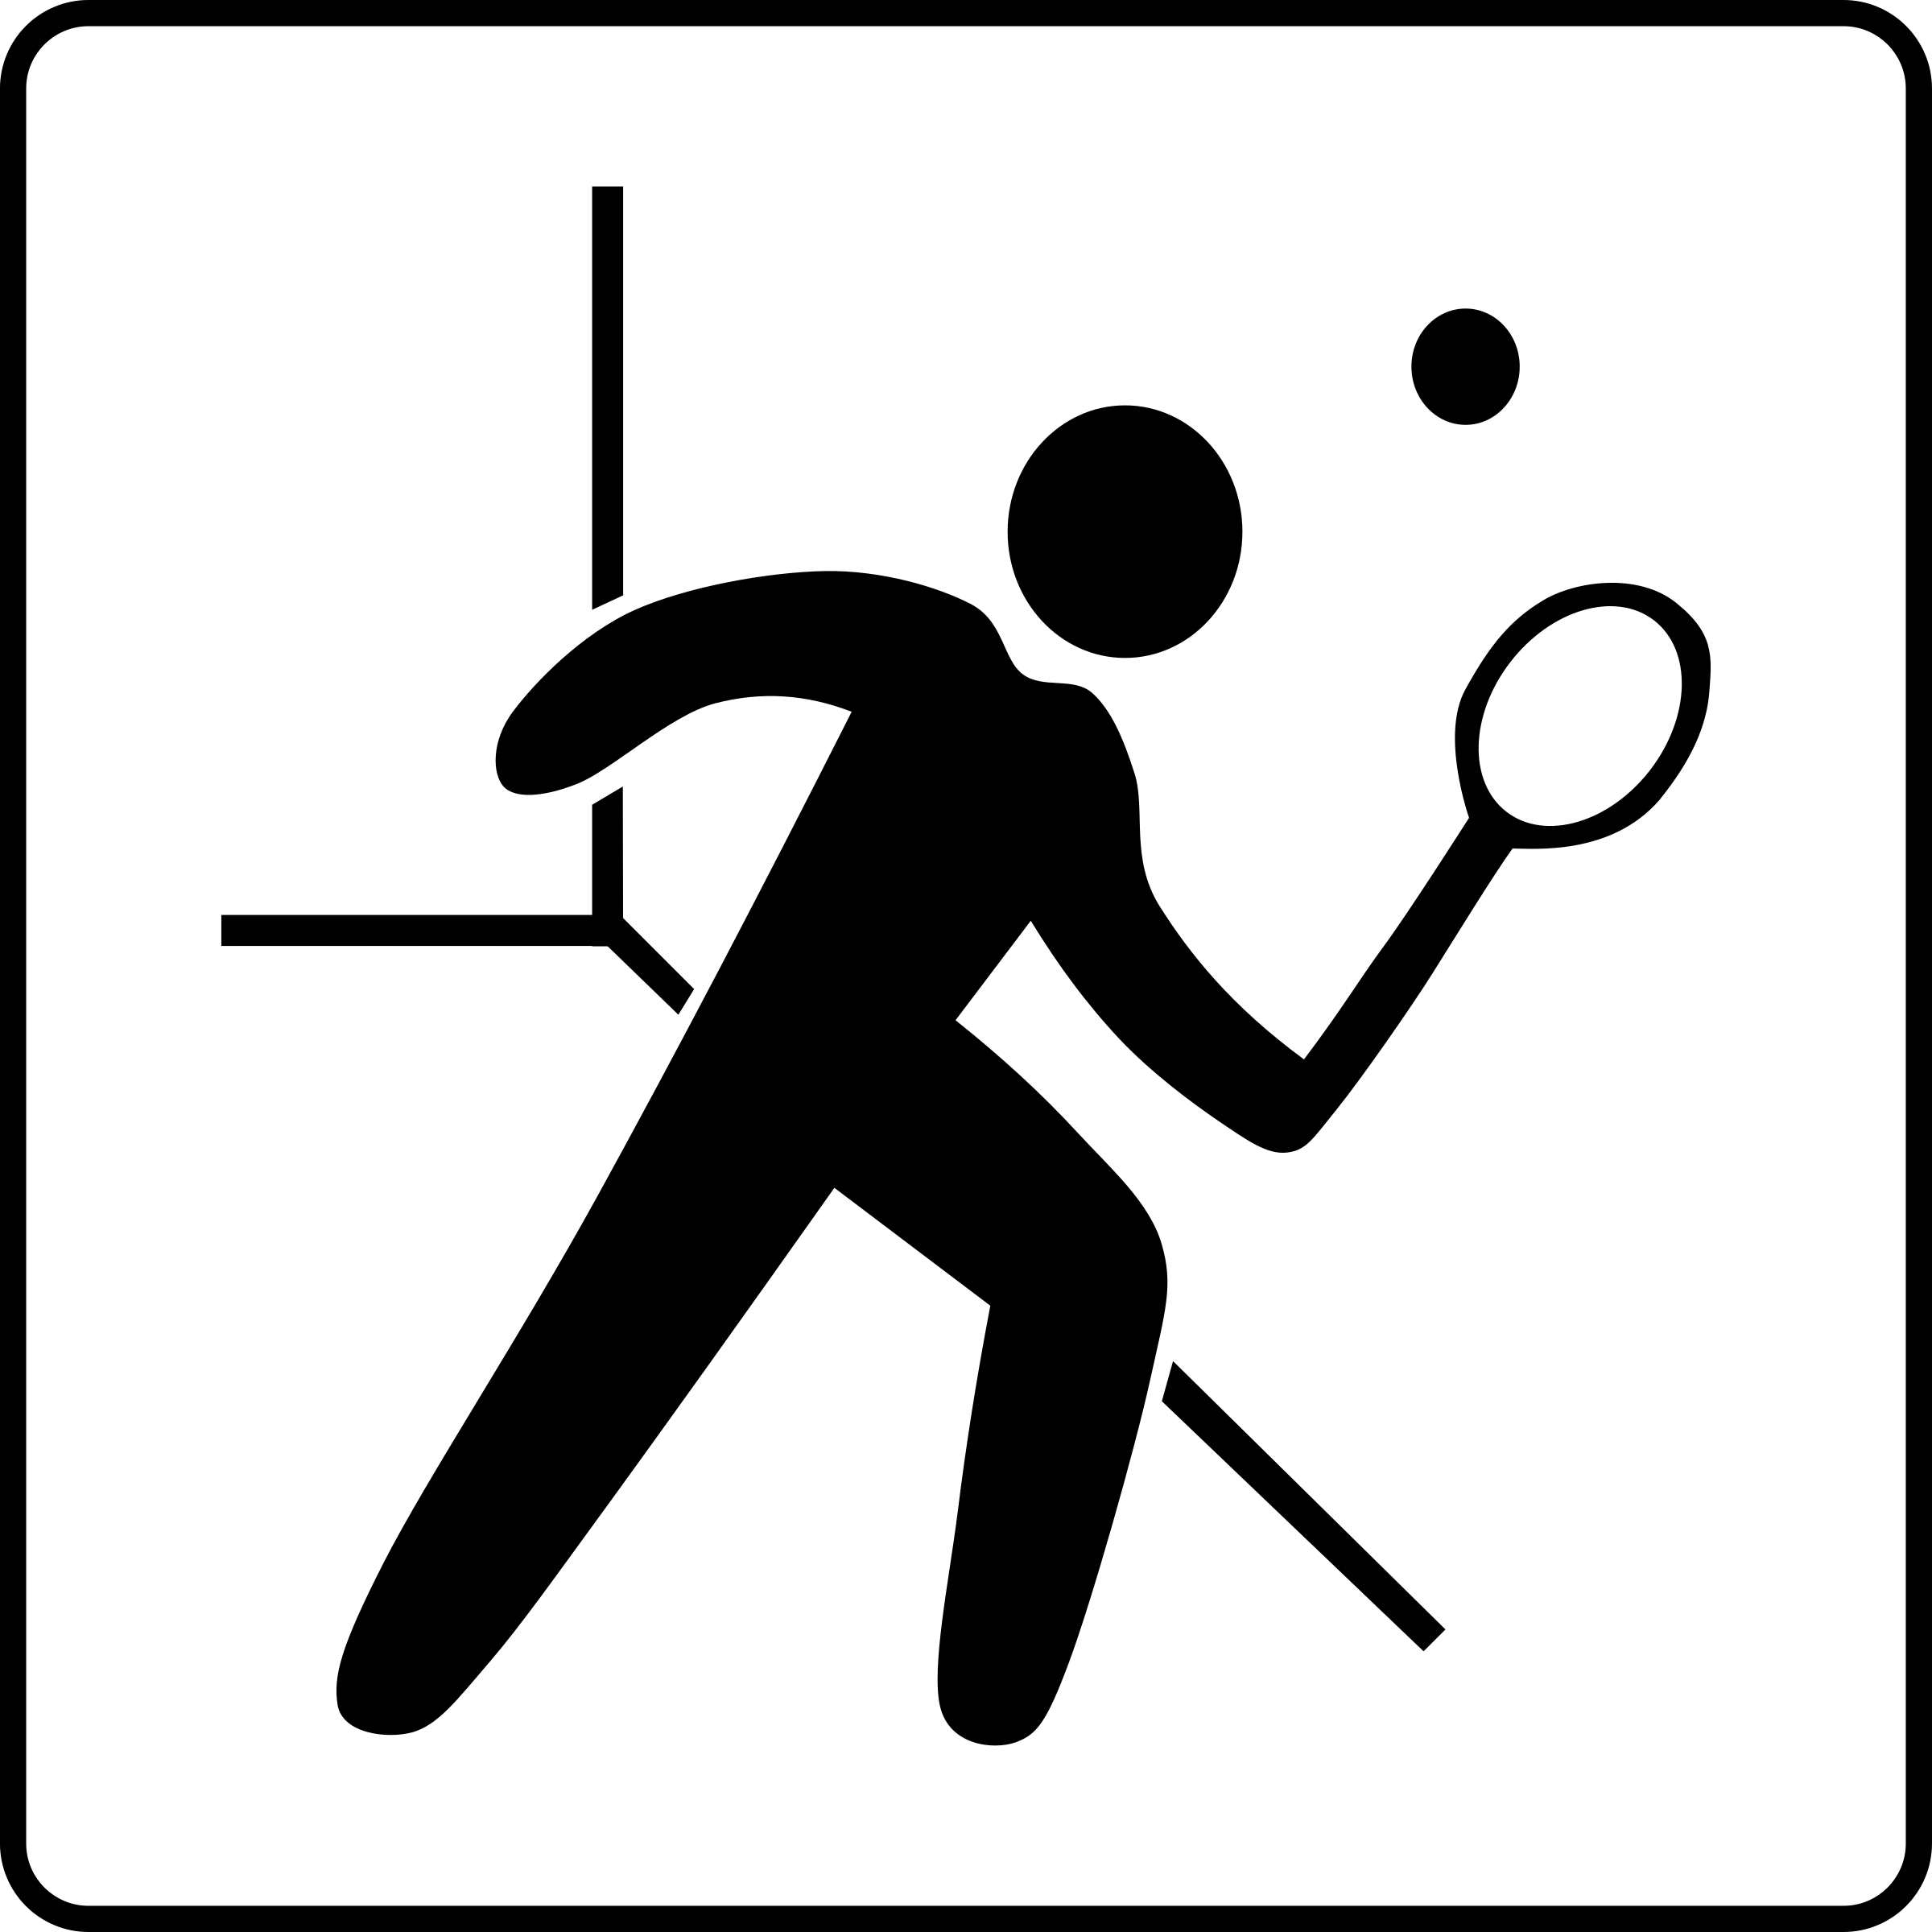 pe clipart sporting event